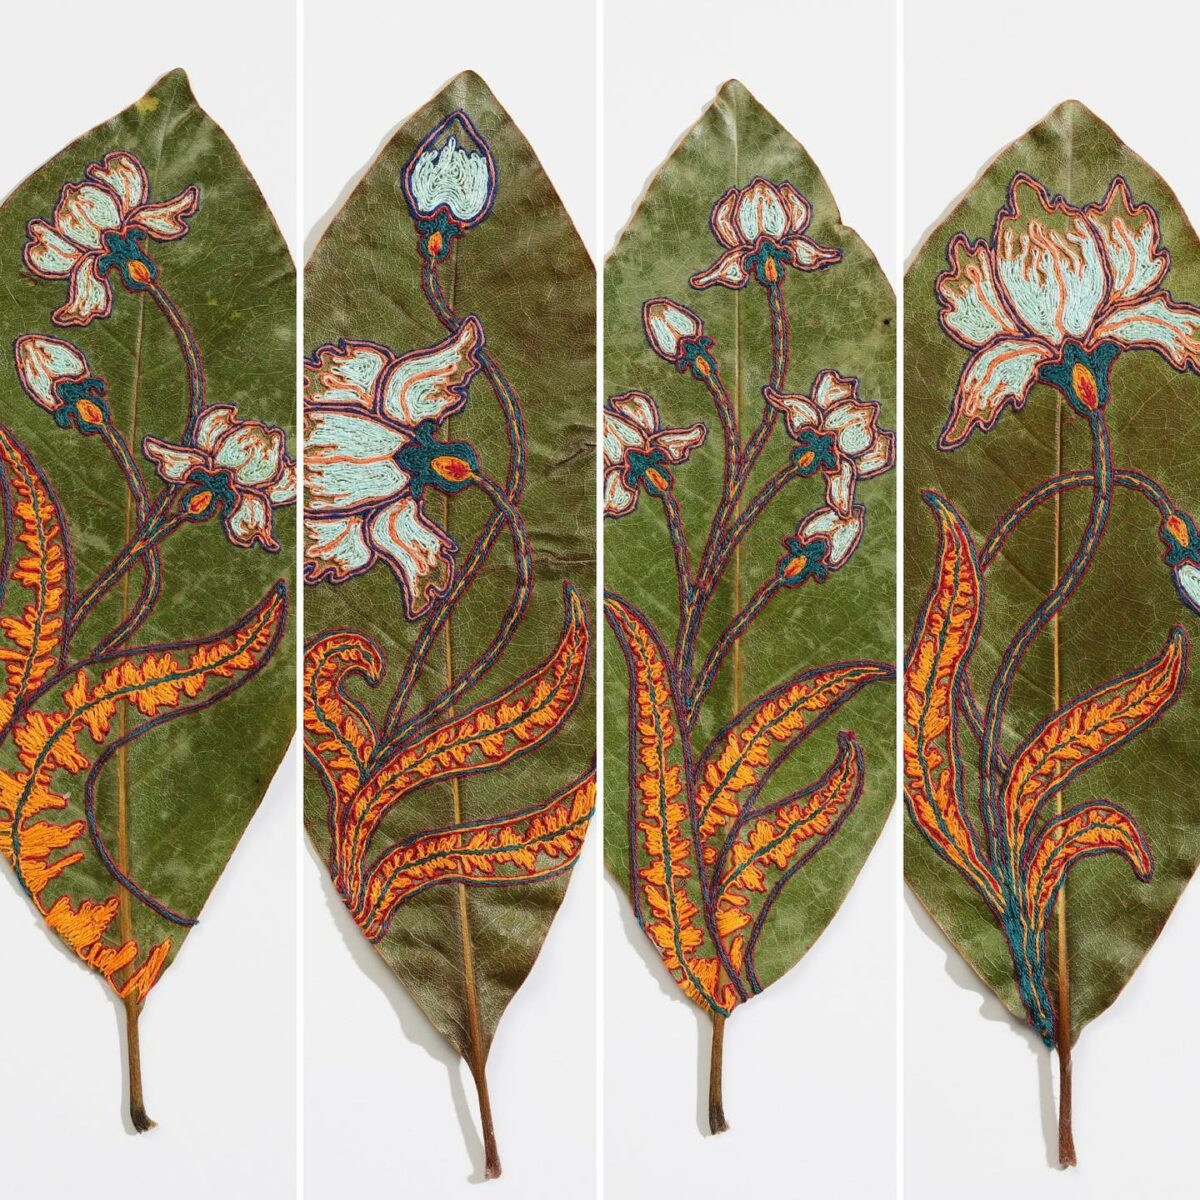 The Fascinating Embroidered Leaf Art Of Hillary Waters Fayle (17)